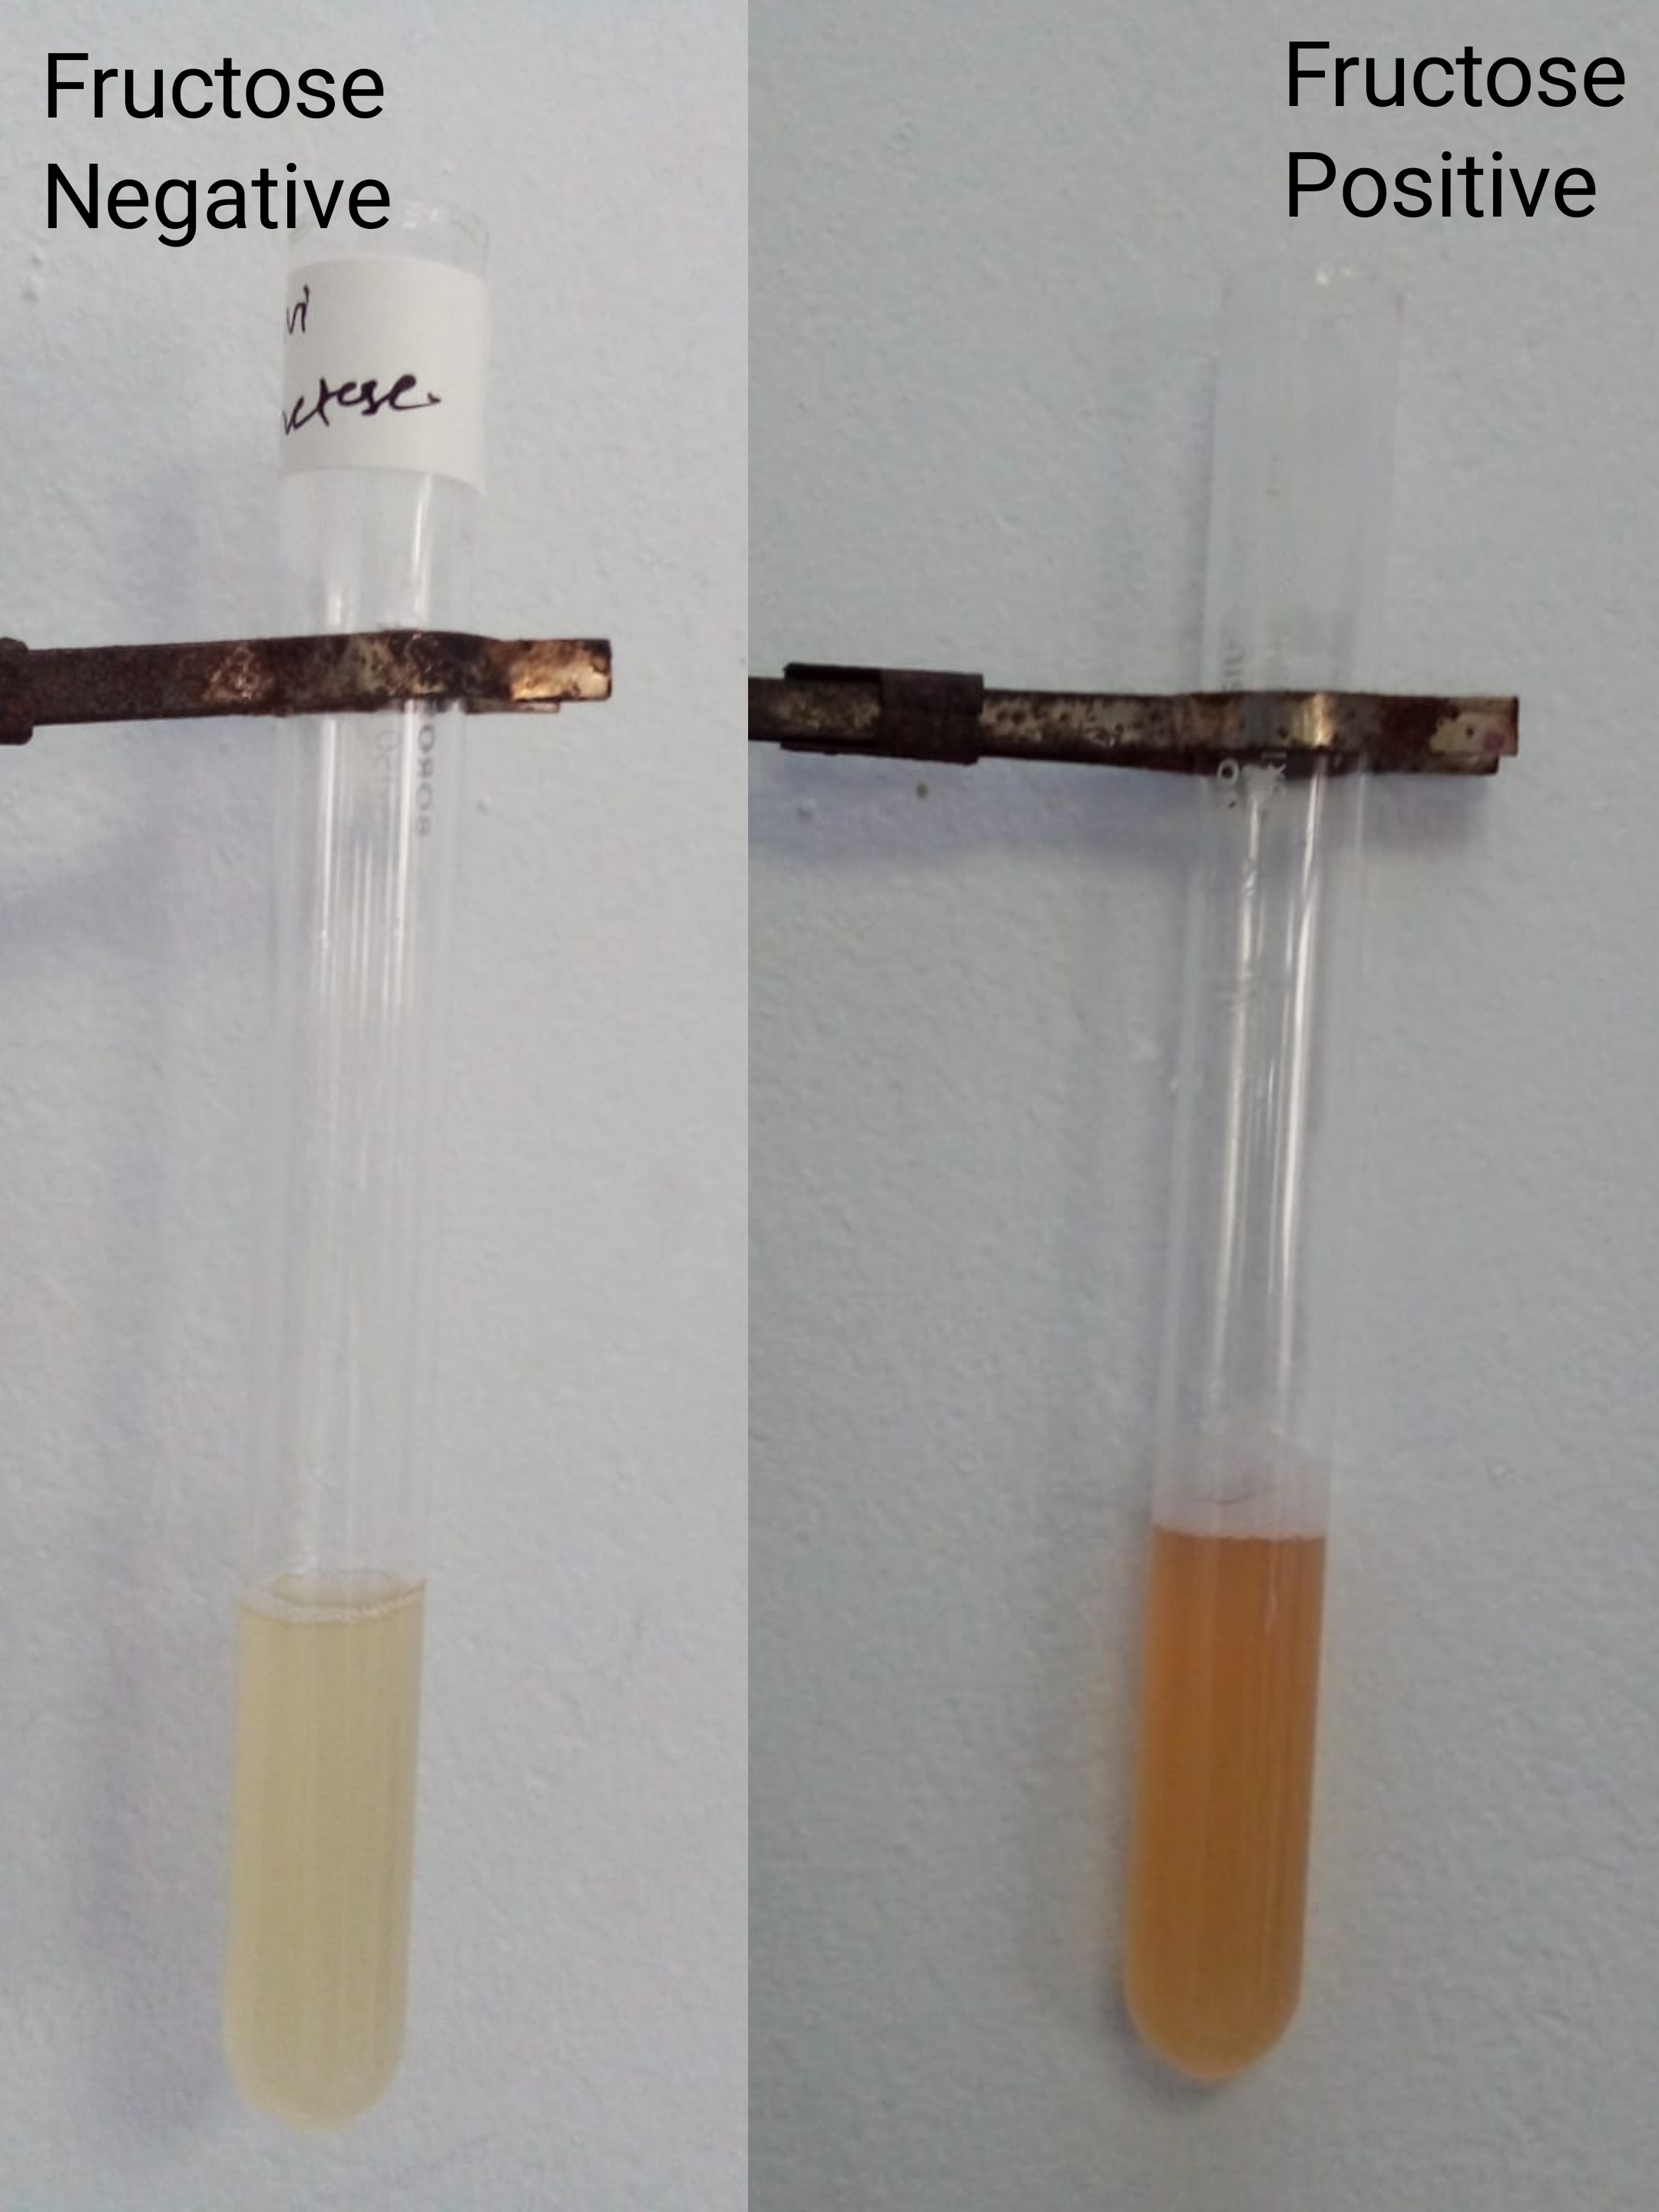 Semen Fructose Test : Seliwanoff Method - compare positive and negative result, fructose is absent in ejaculatory duct abnormalities (Image released in public domain)